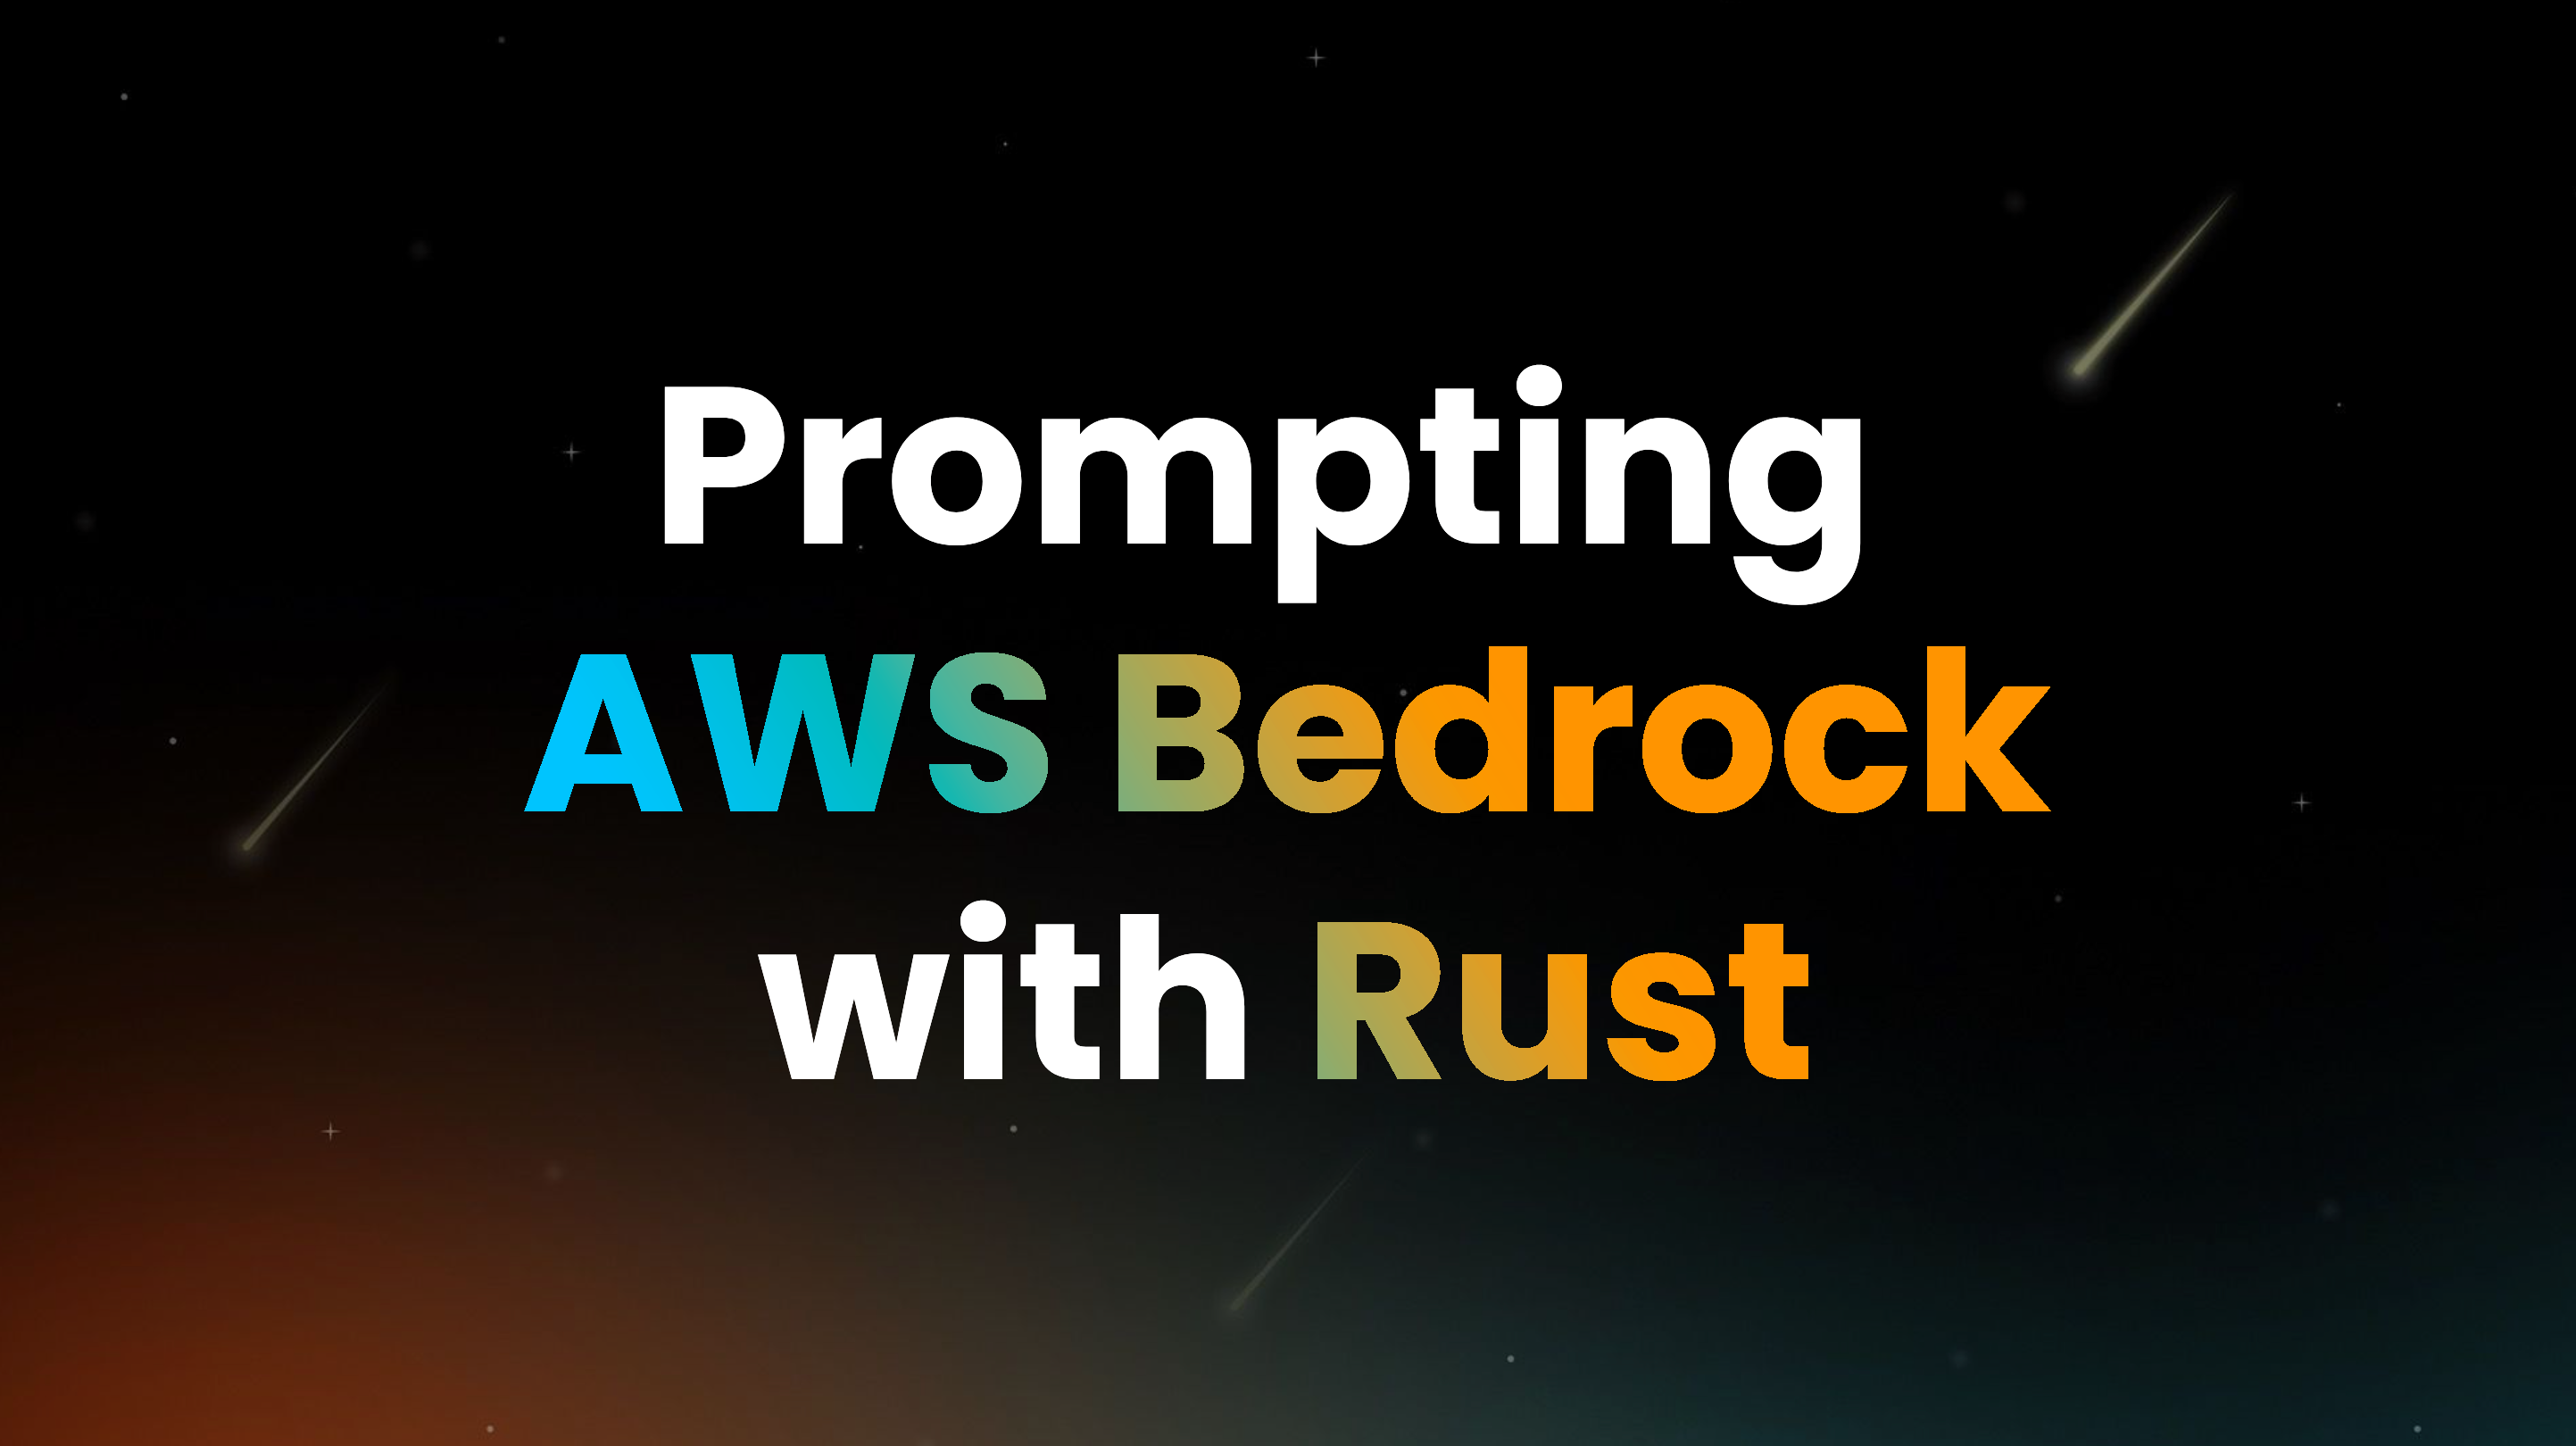 Prompting AWS Bedrock with Rust